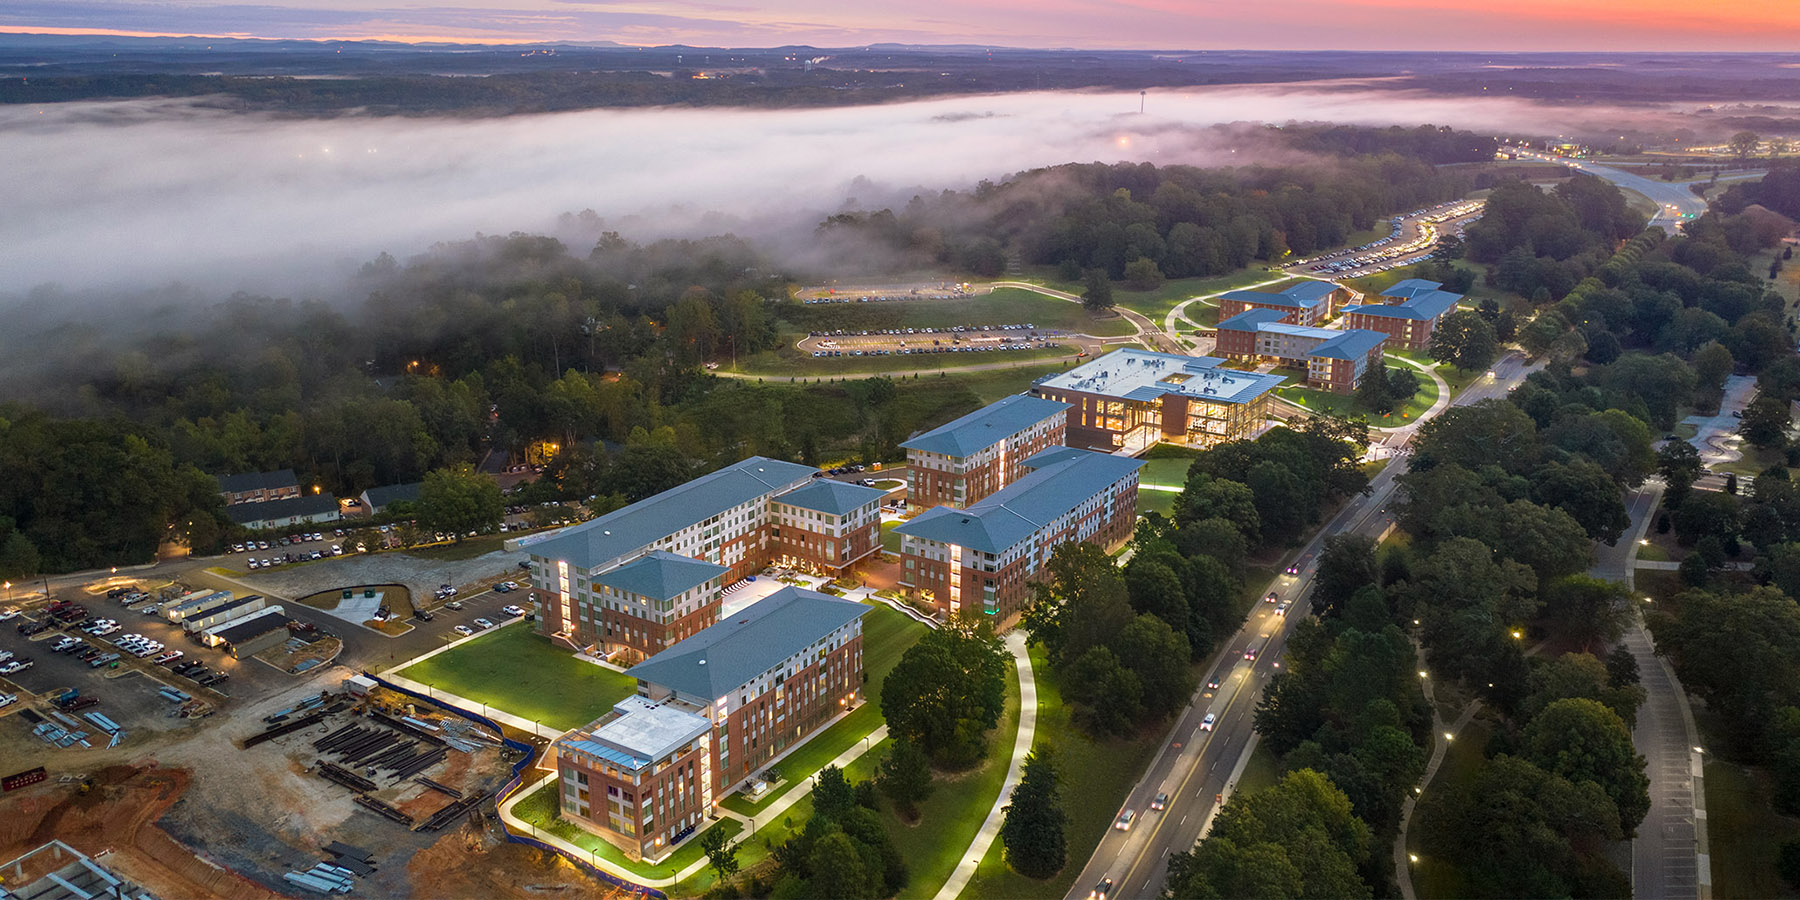 Boudreaux architects worked with Clemson University on the Douthit Hills HUB project.